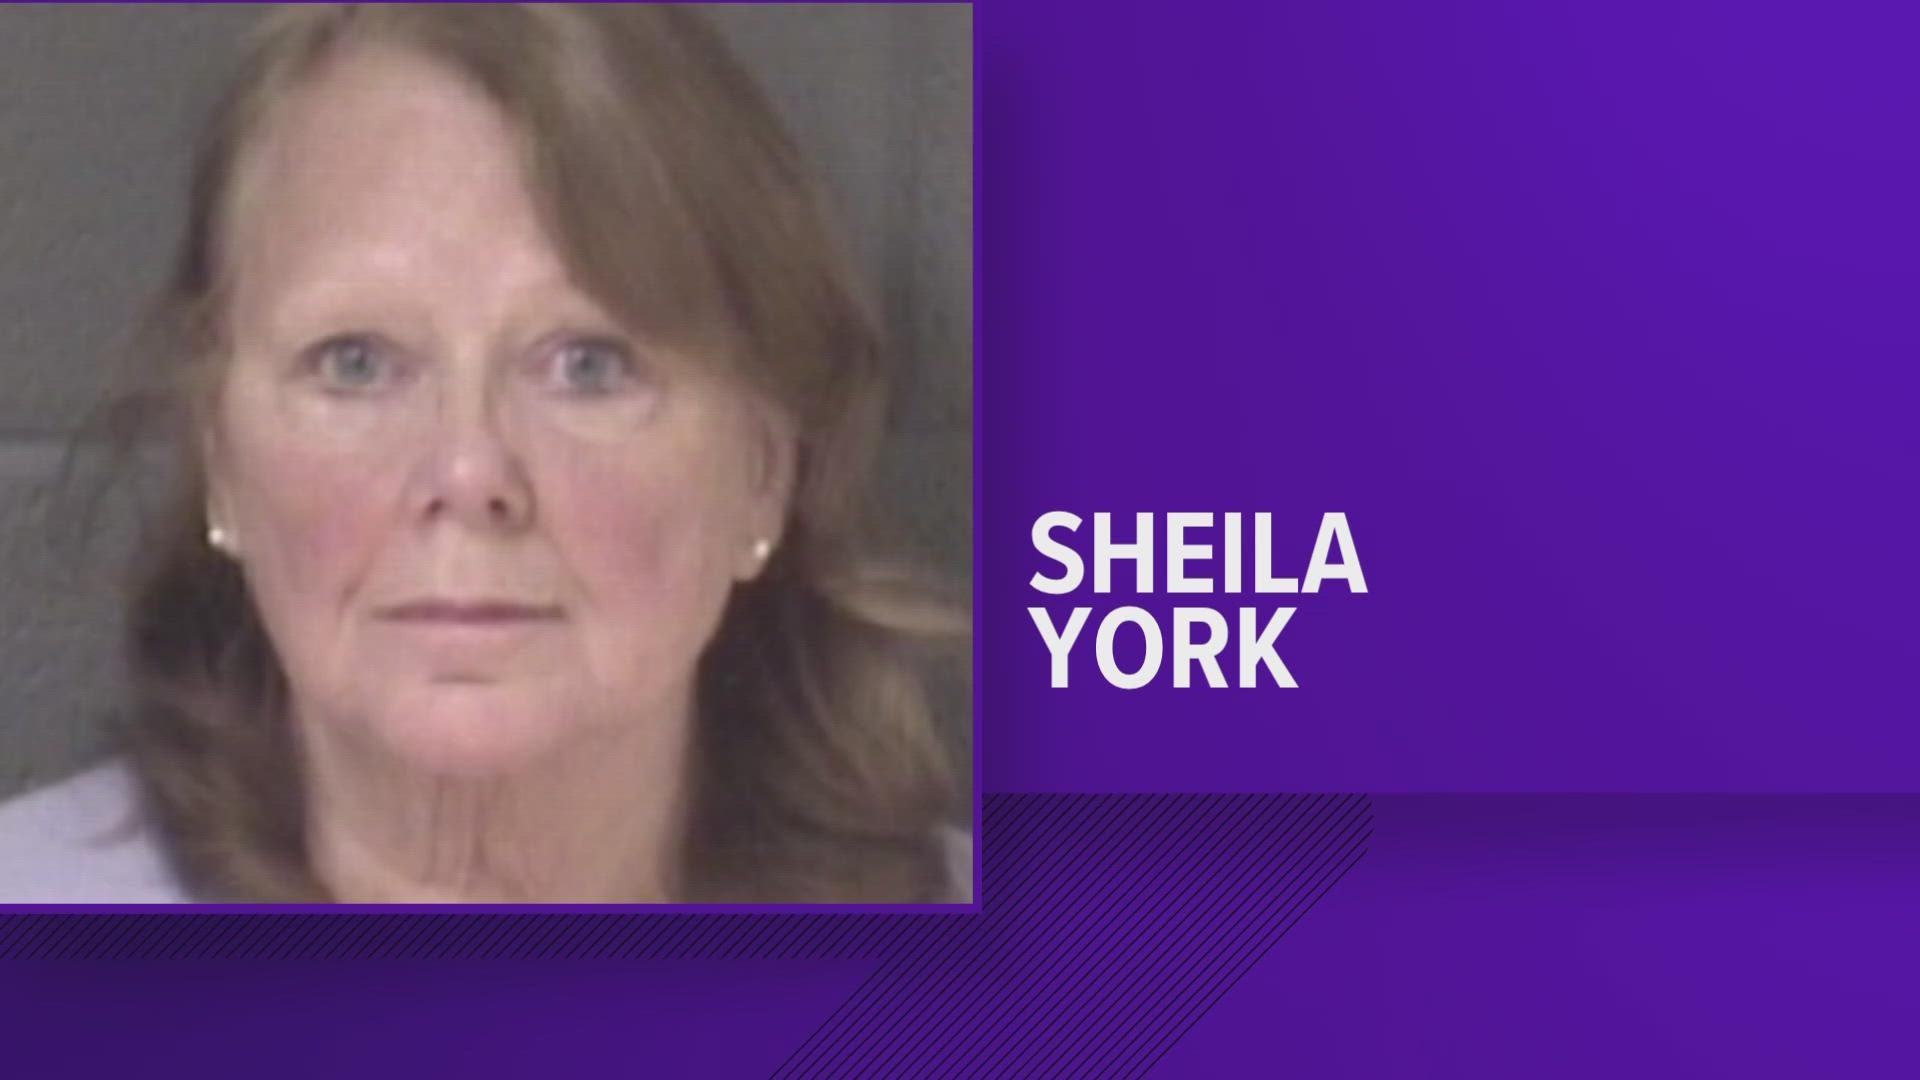 66-year-old Sheila York was being held at a jail in Asheville, North Carolina.